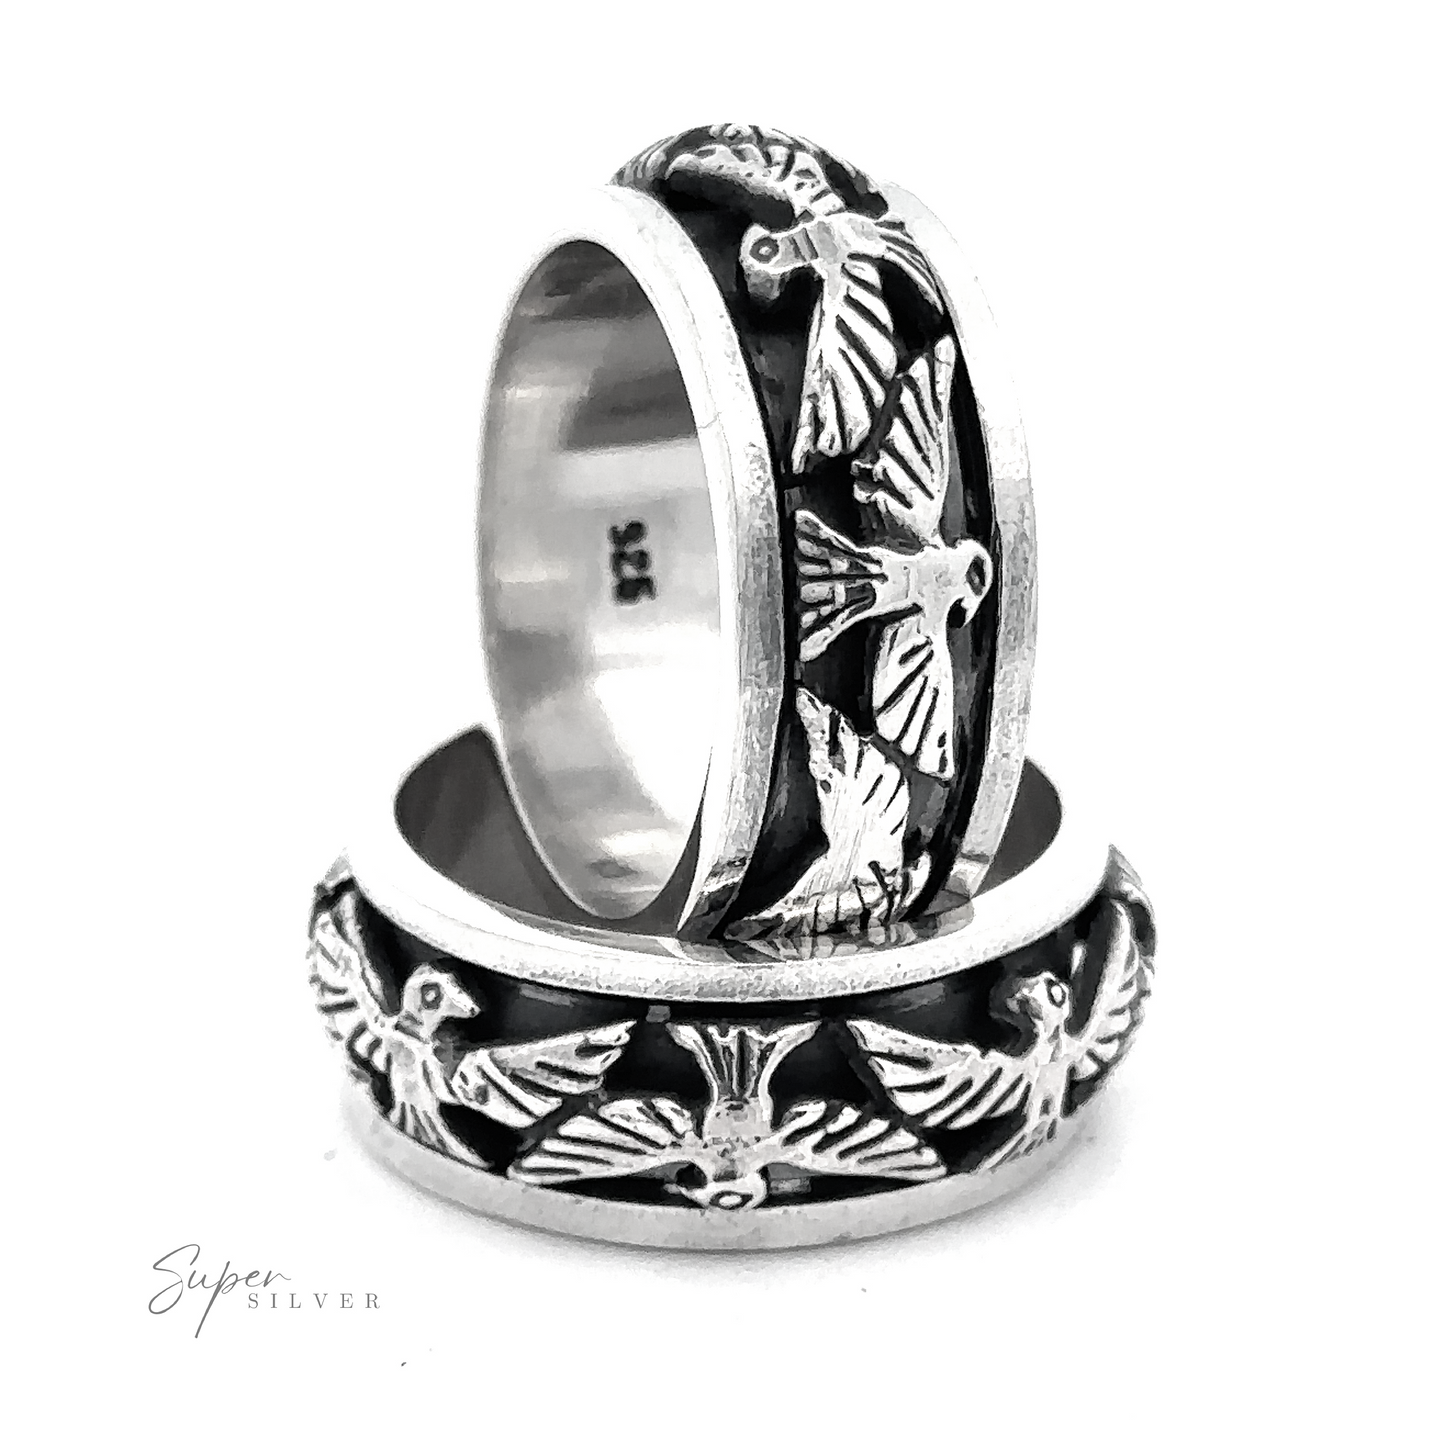 
                  
                    Two silver rings with intricate thunderbird engravings on the bands are stacked against a white background. The words "Thick Thunderbird Spinner Ring" appear in the lower left corner.
                  
                